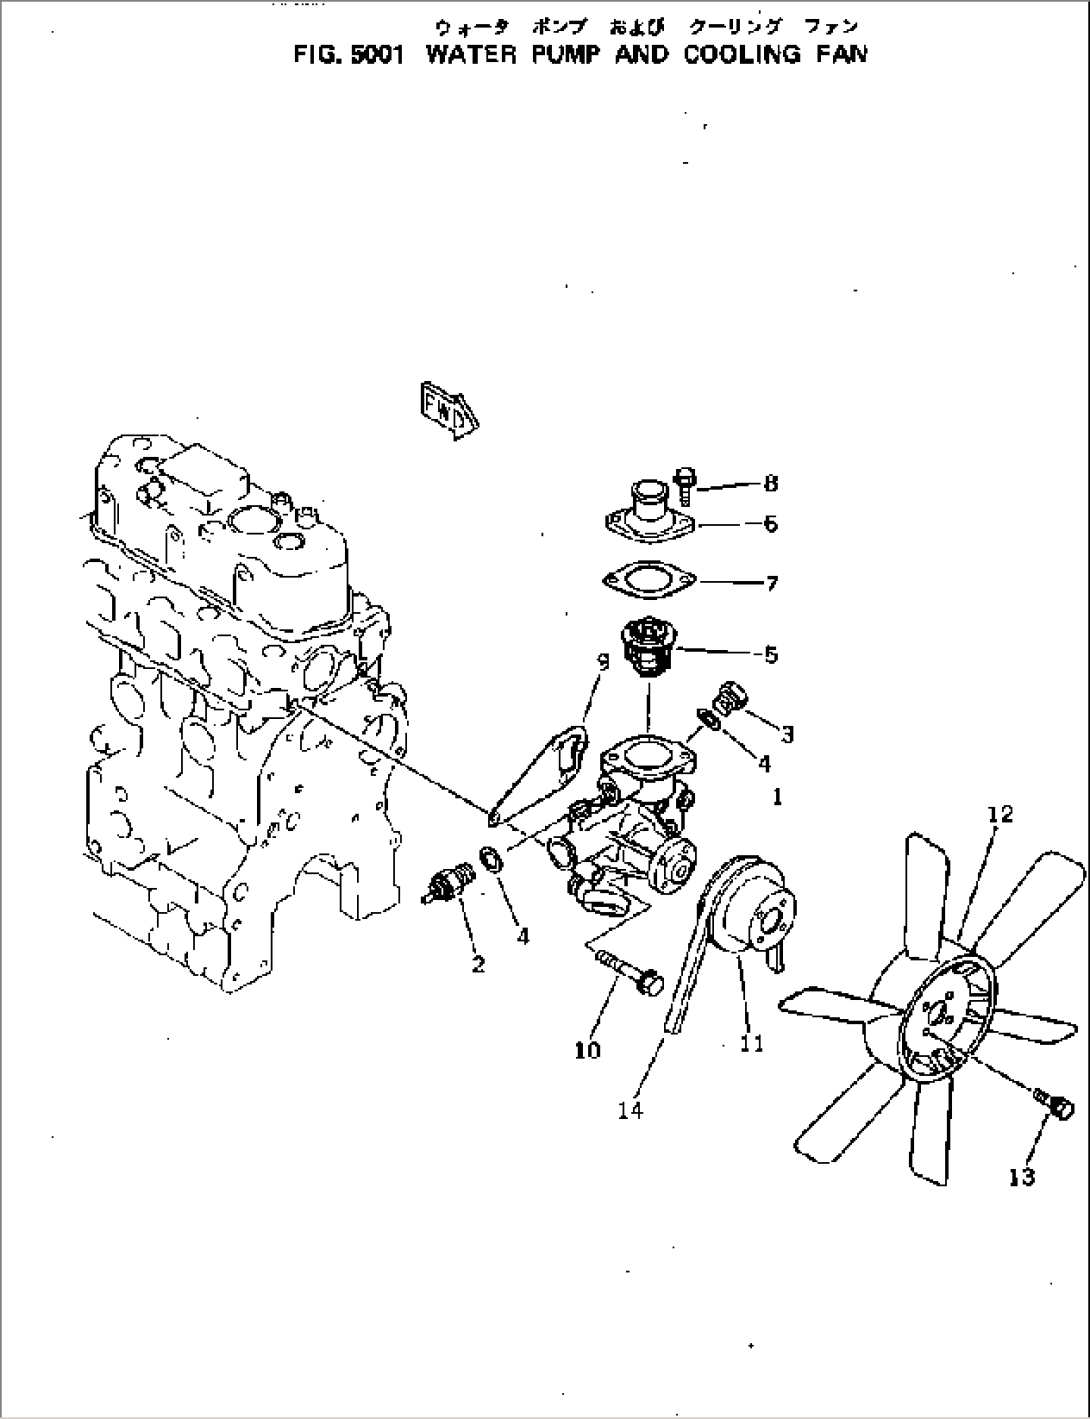 WATER PUMP AND COOLING FAN